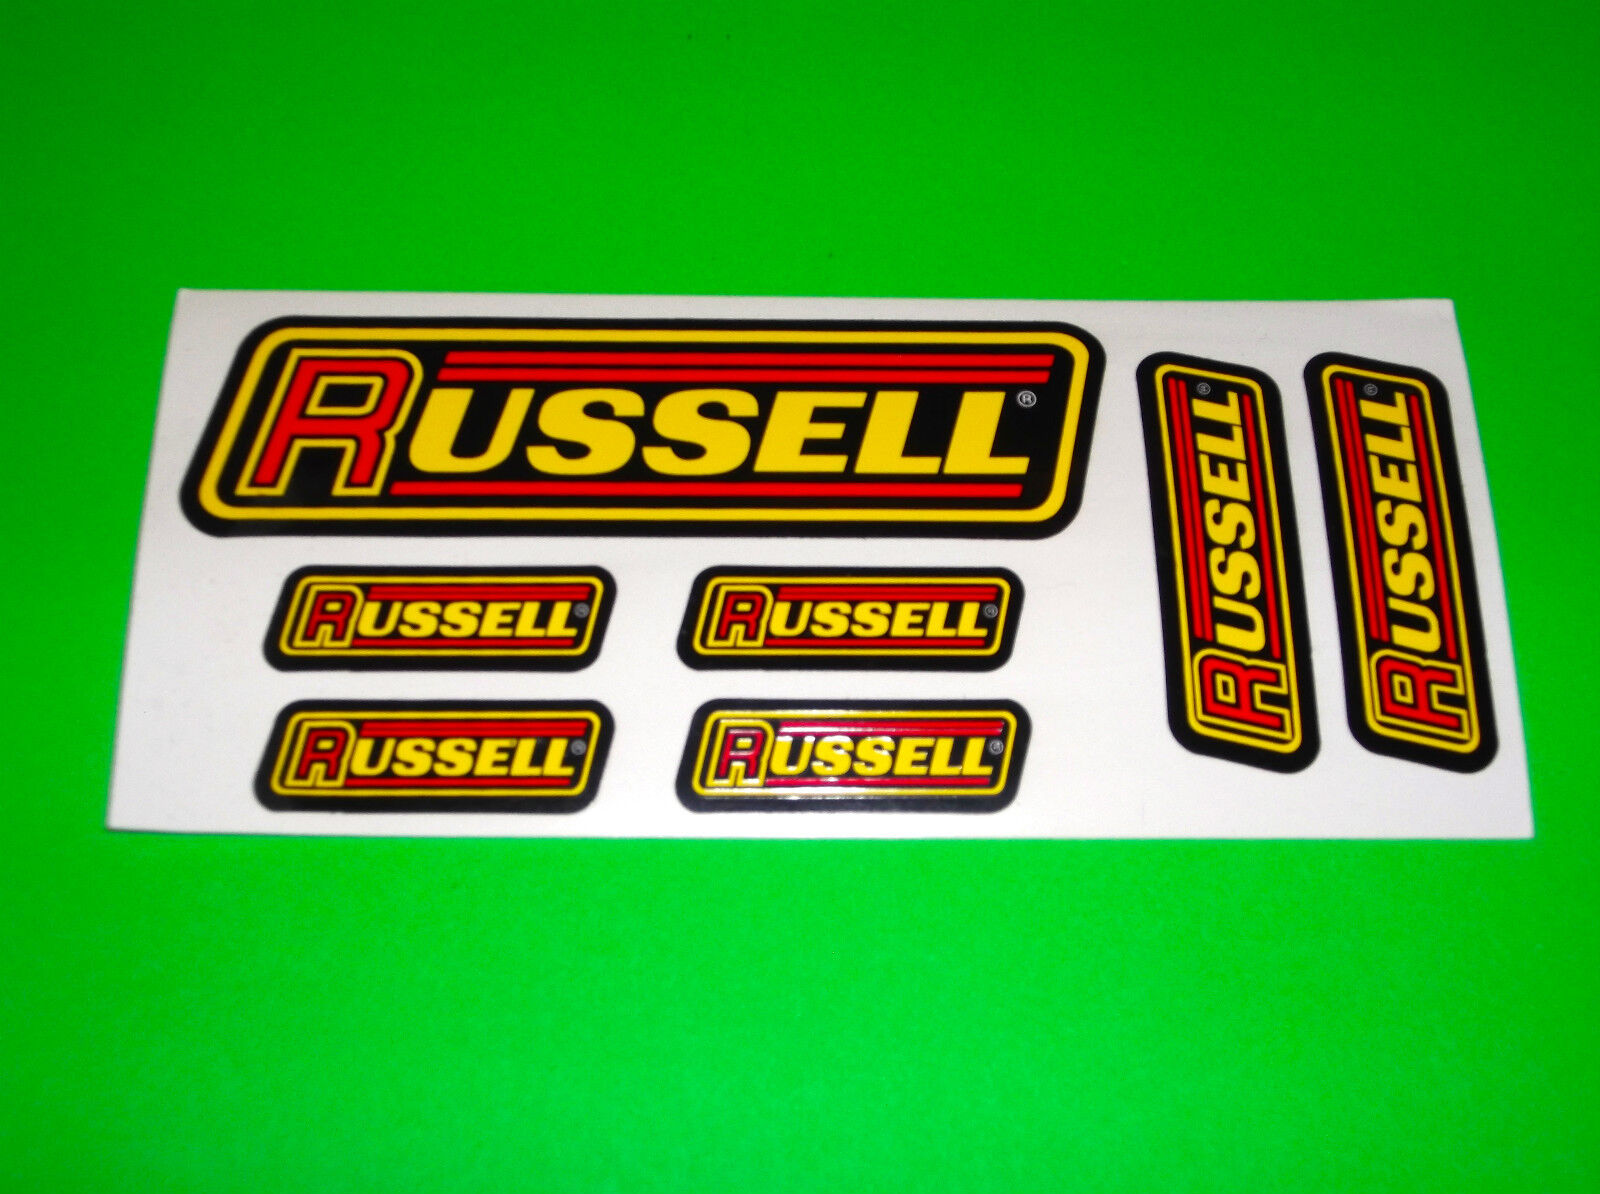 RUSSELL BRAKE CLUTCH HOSES ENDS NITROUS FUEL BLEEDERS DRIVELINE STICKERS DECALS